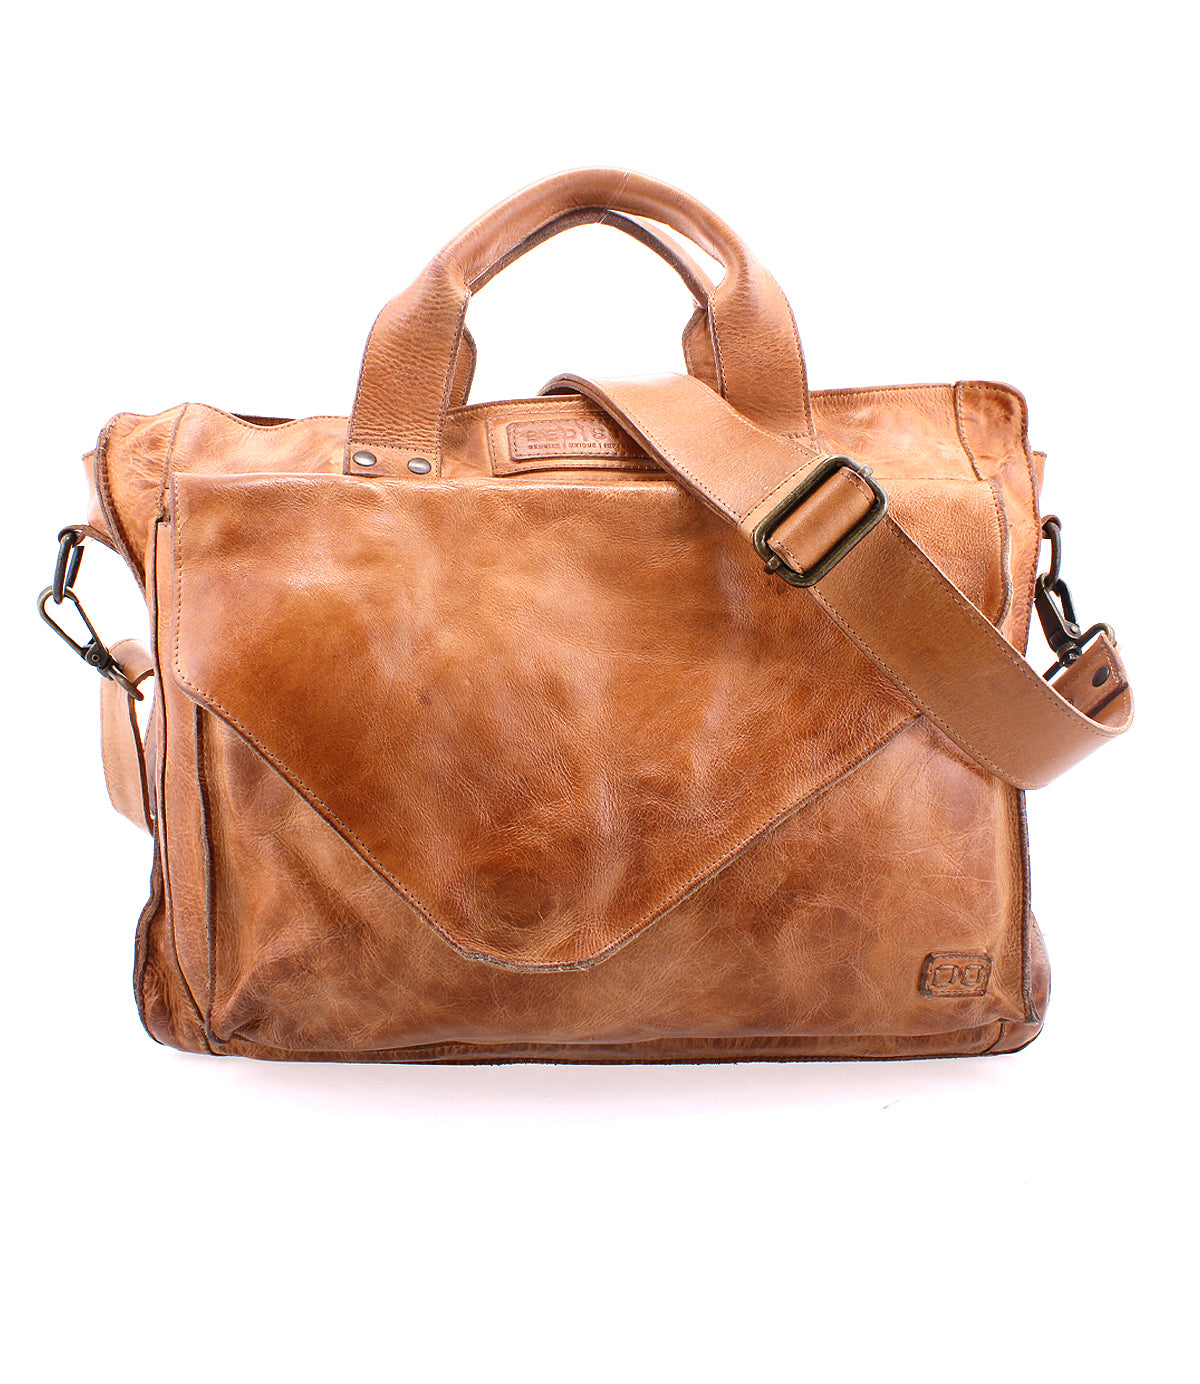 The Depp laptop bag by Bed Stu, perfect for organization and carrying belongings, is showcased on a white background.